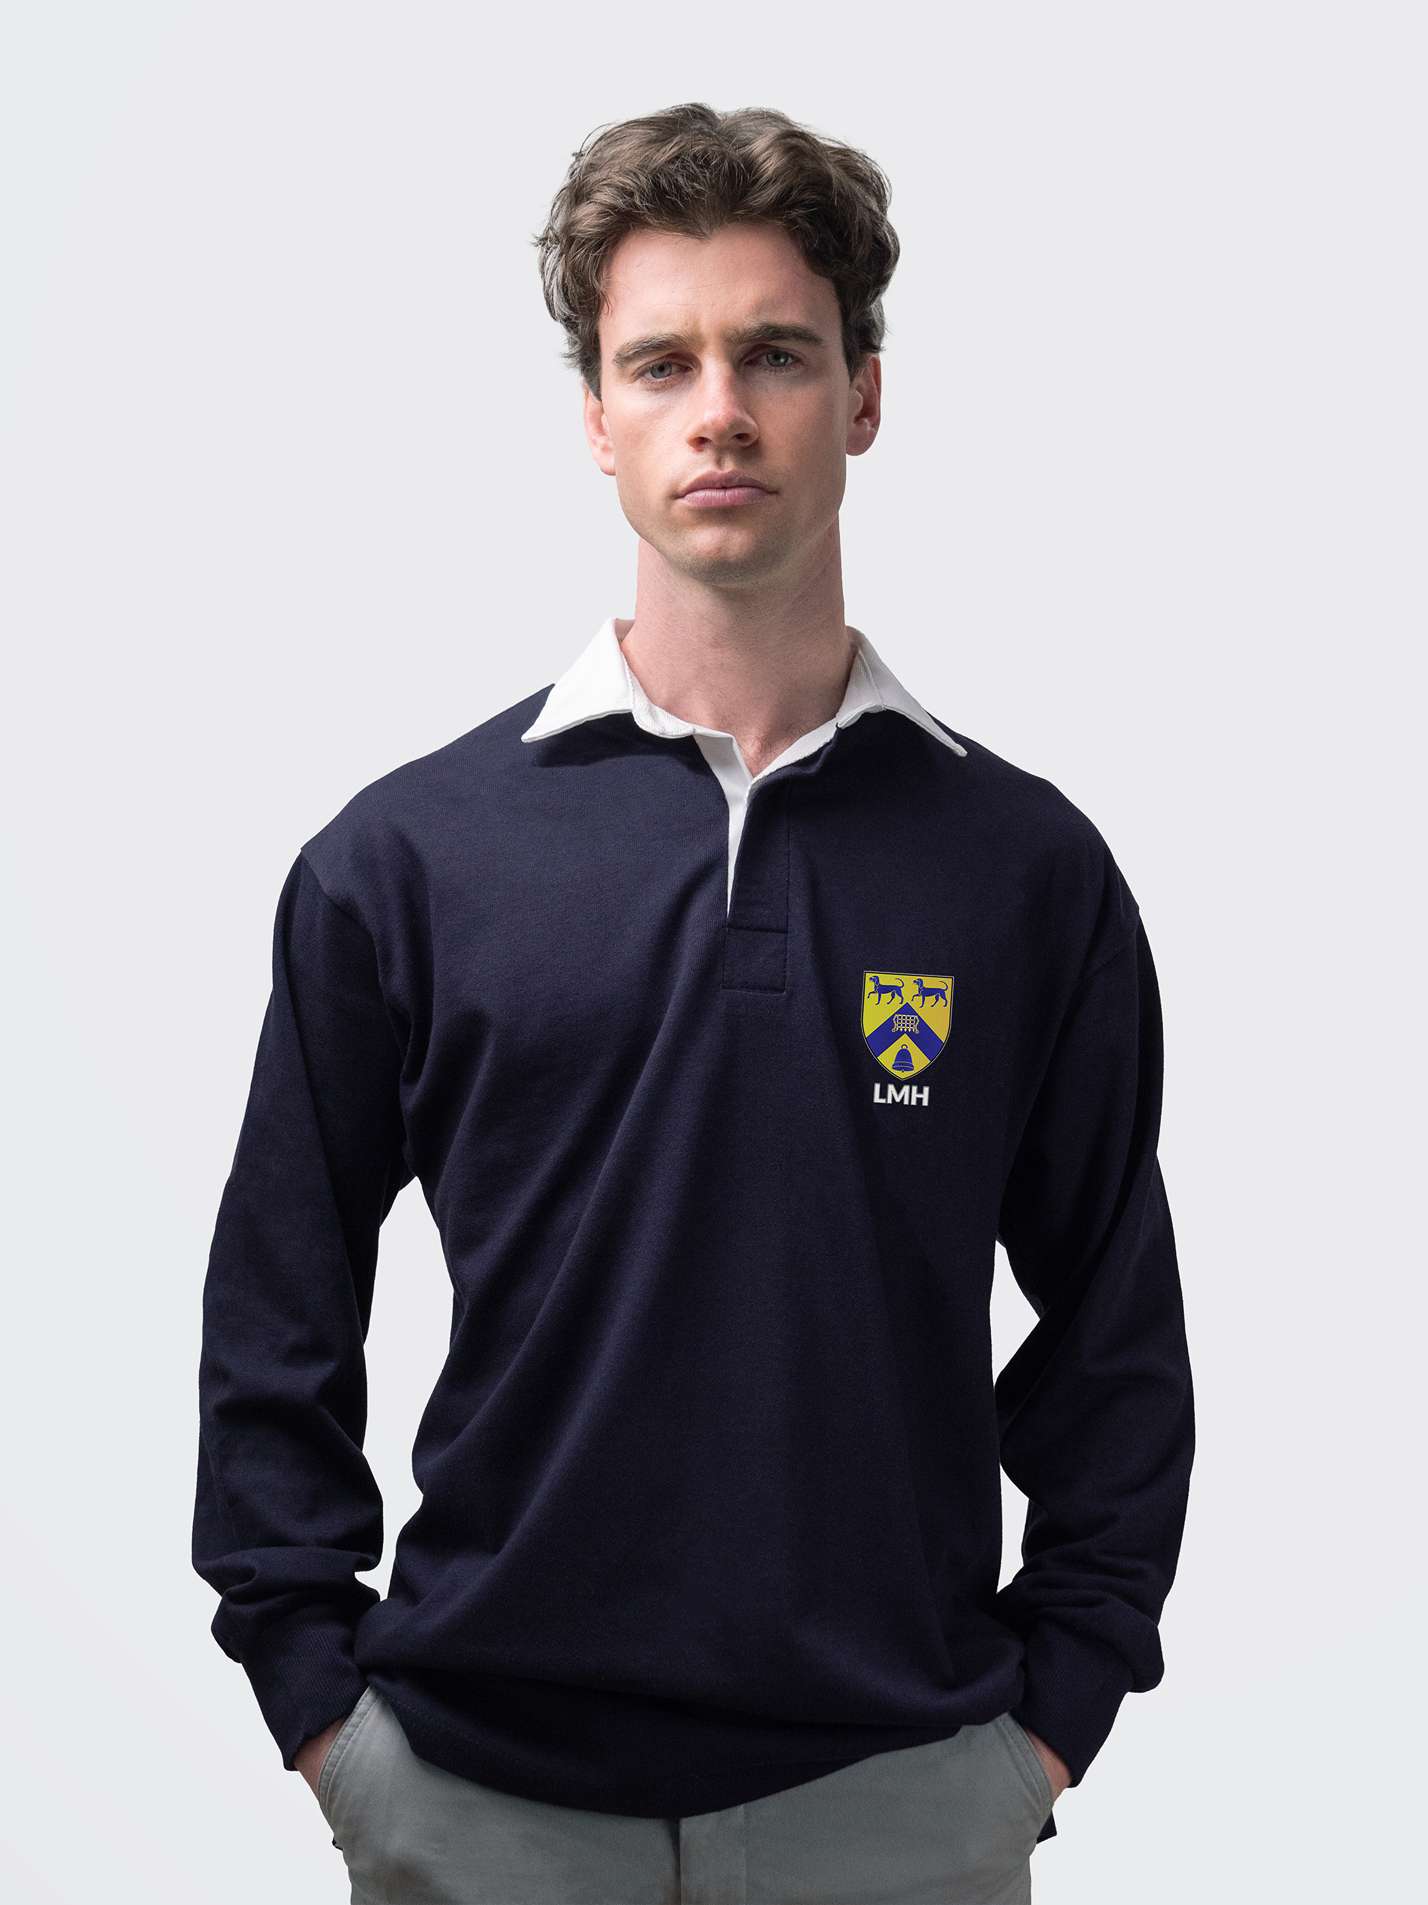 Lady Margaret Hall Oxford Classic Men's Rugby Shirt